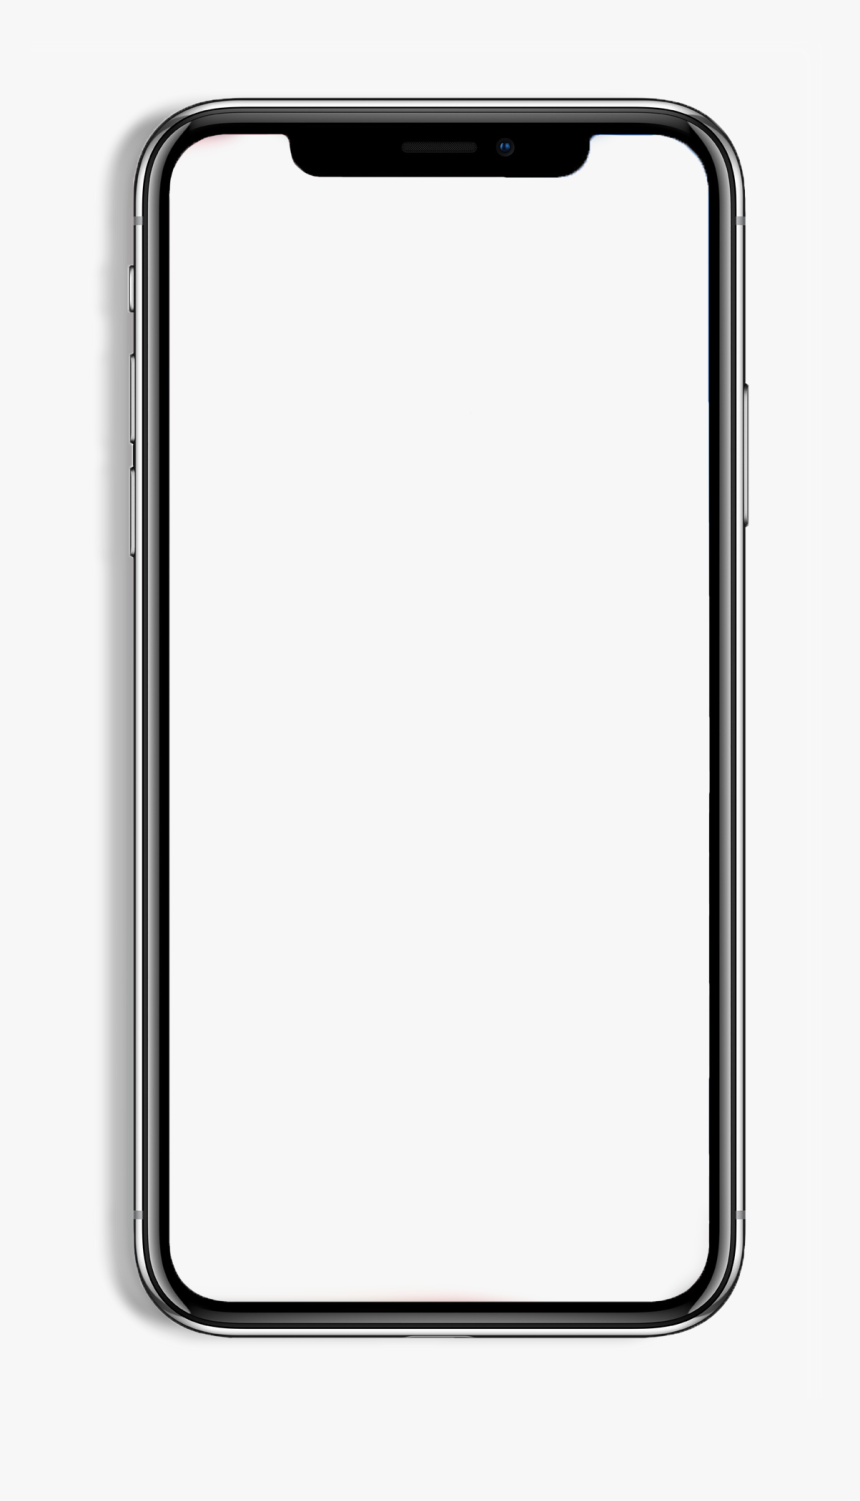 Iphone X Device Frame Png, Transparent Png, Free Download